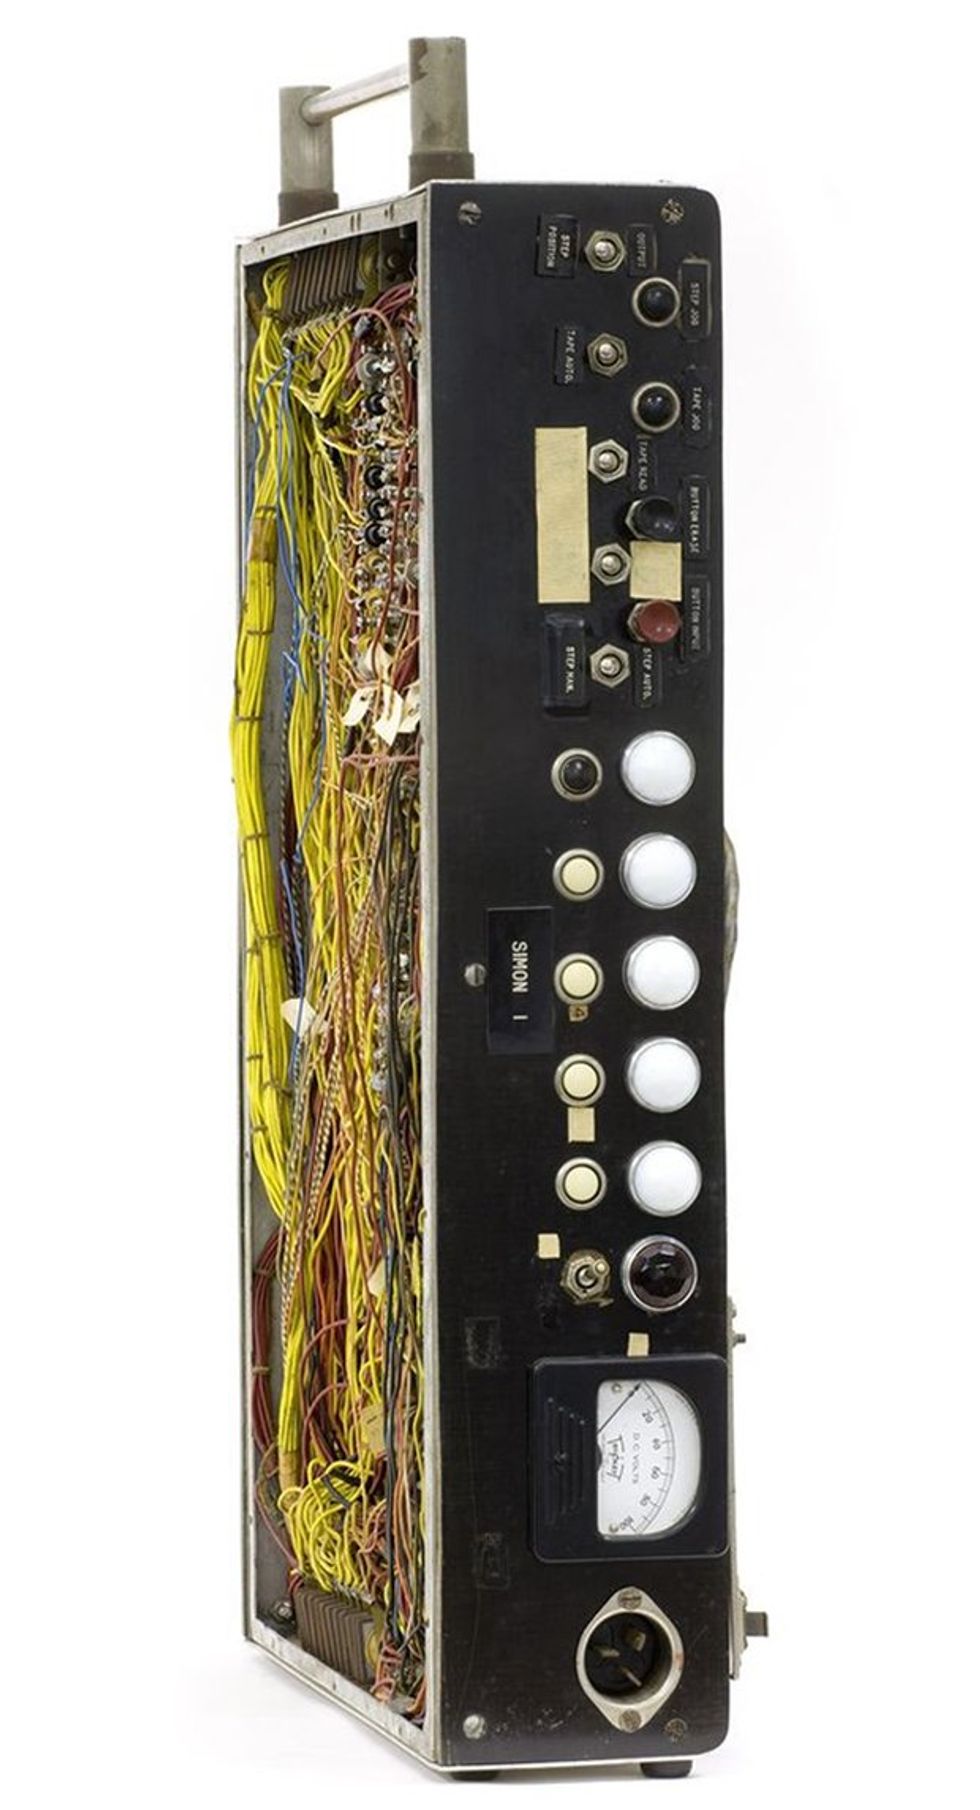  photo of a rectangular electronics device with one cover removed to reveal wiring.